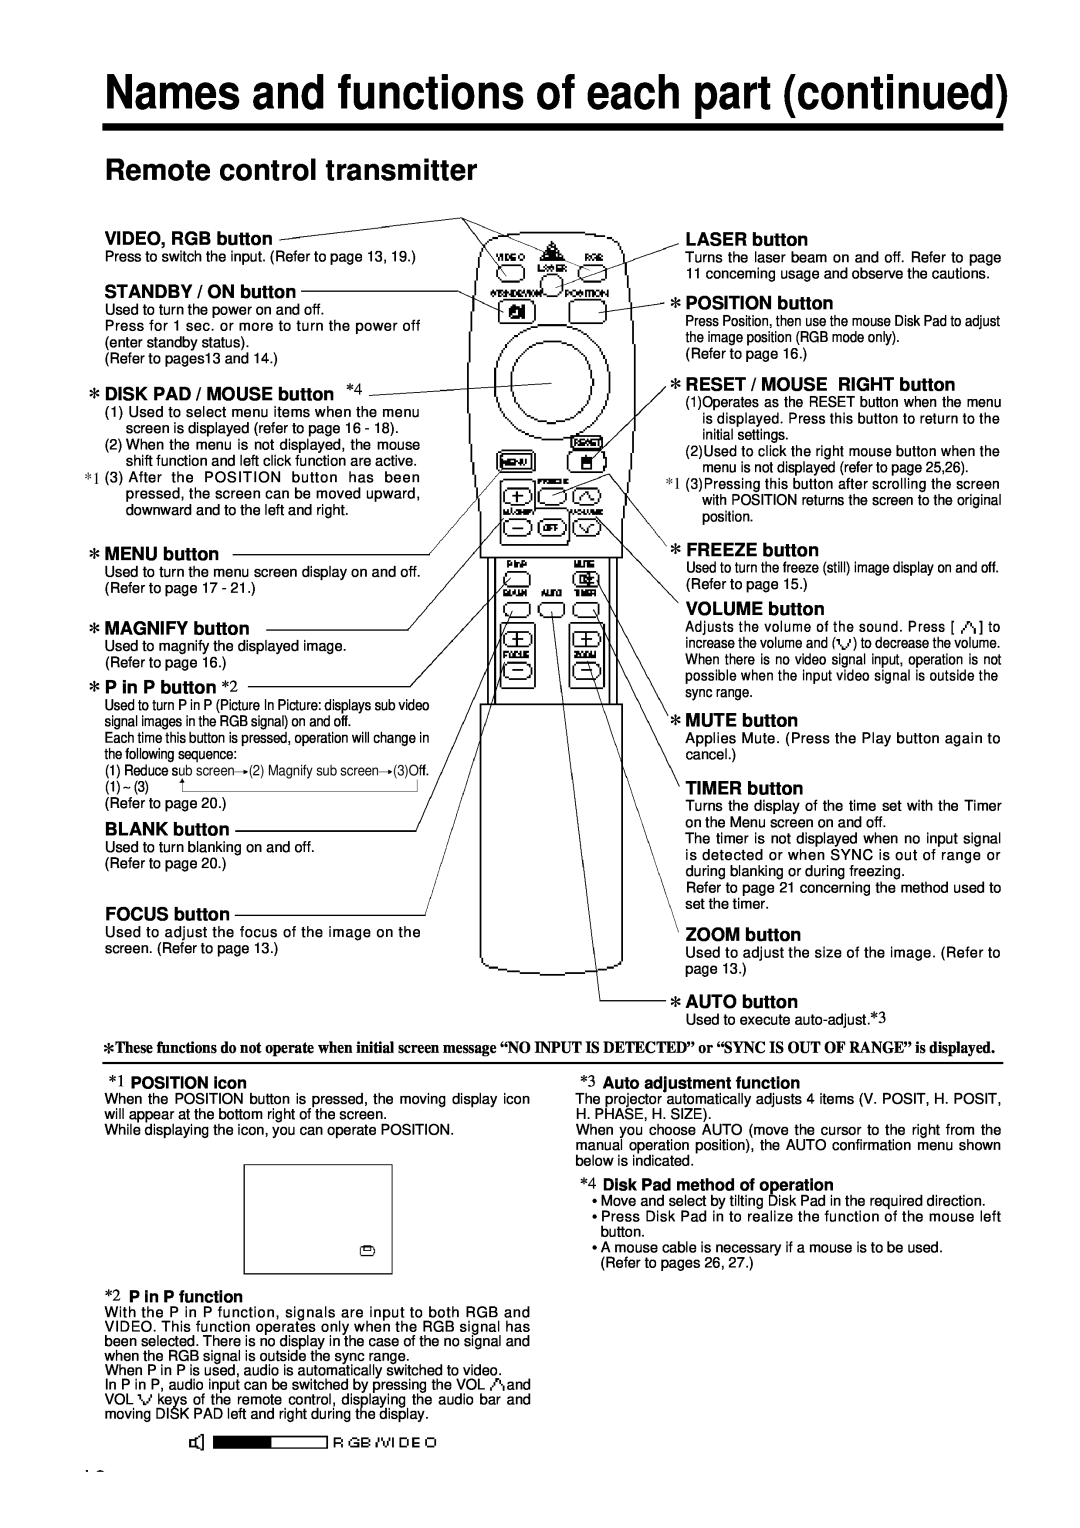 Polaroid PV 360 specifications Names and functions of each part continued, Remote control transmitter 